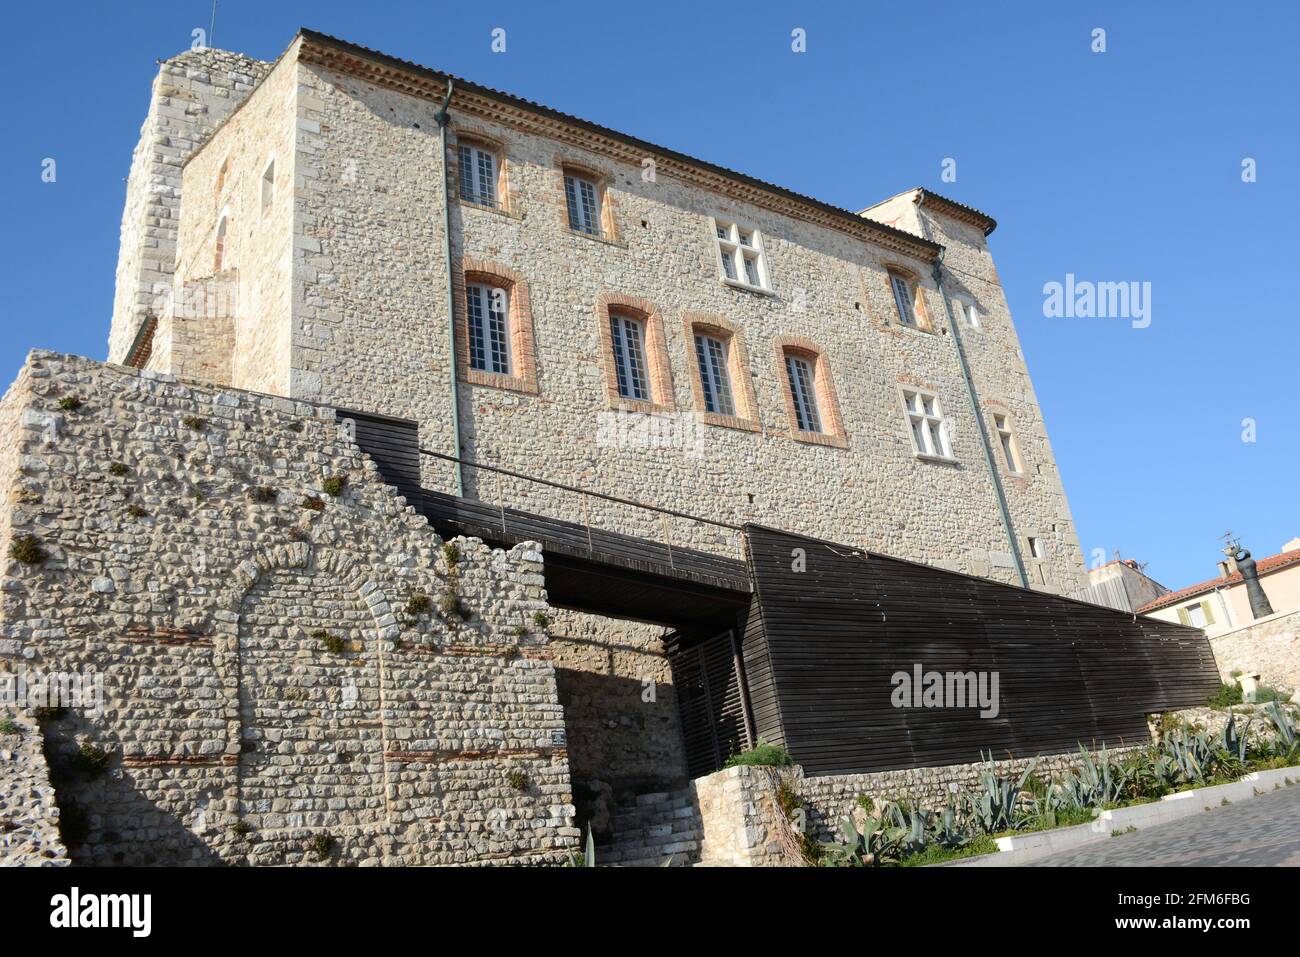 France, french riviera, Antibes, the Grimaldi castel shelters a famous museum of modern art in the historic center near the ramparts. Stock Photo